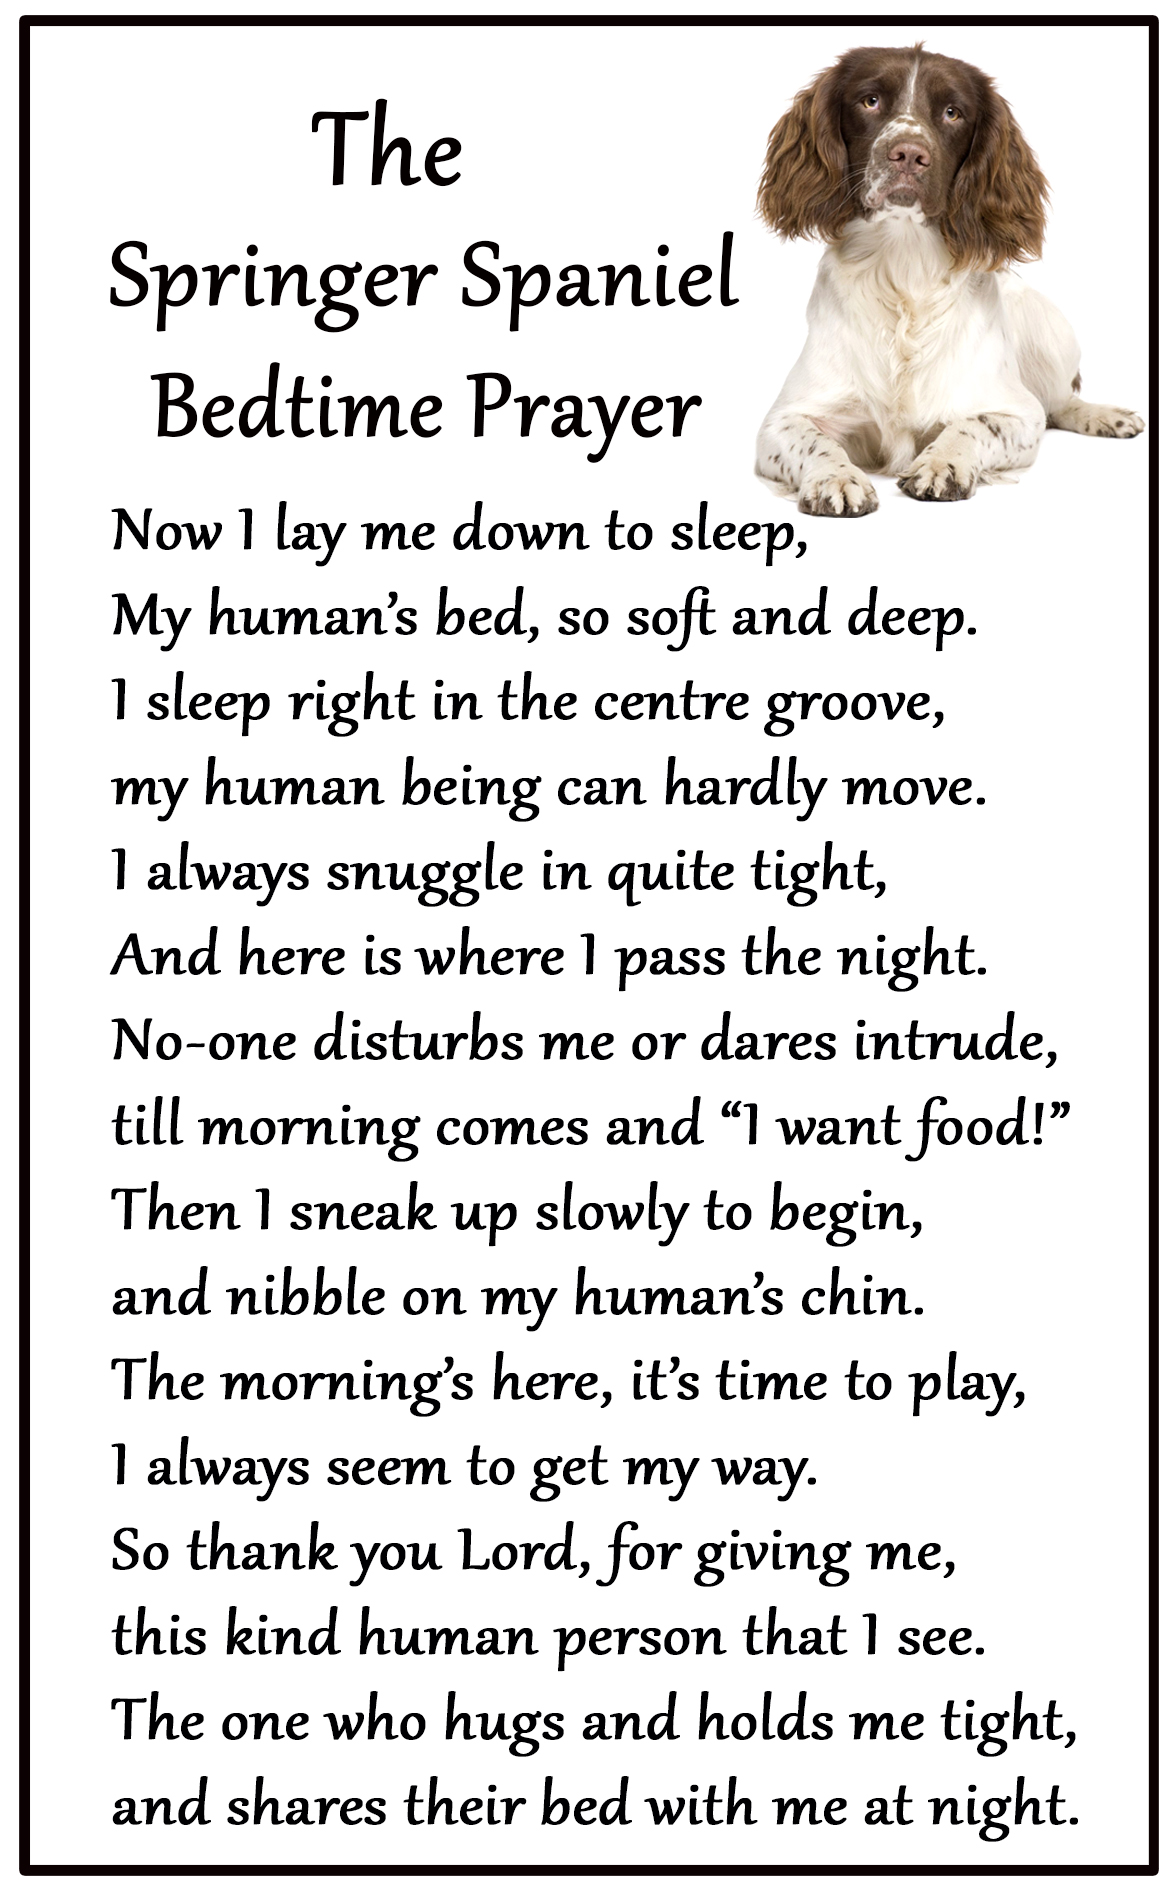 Large Fun flexible size 16cms x 10 cms Bedtime Prayer for Dog Lovers Fridge Magnets Cockapoo Black approx. 6 x4